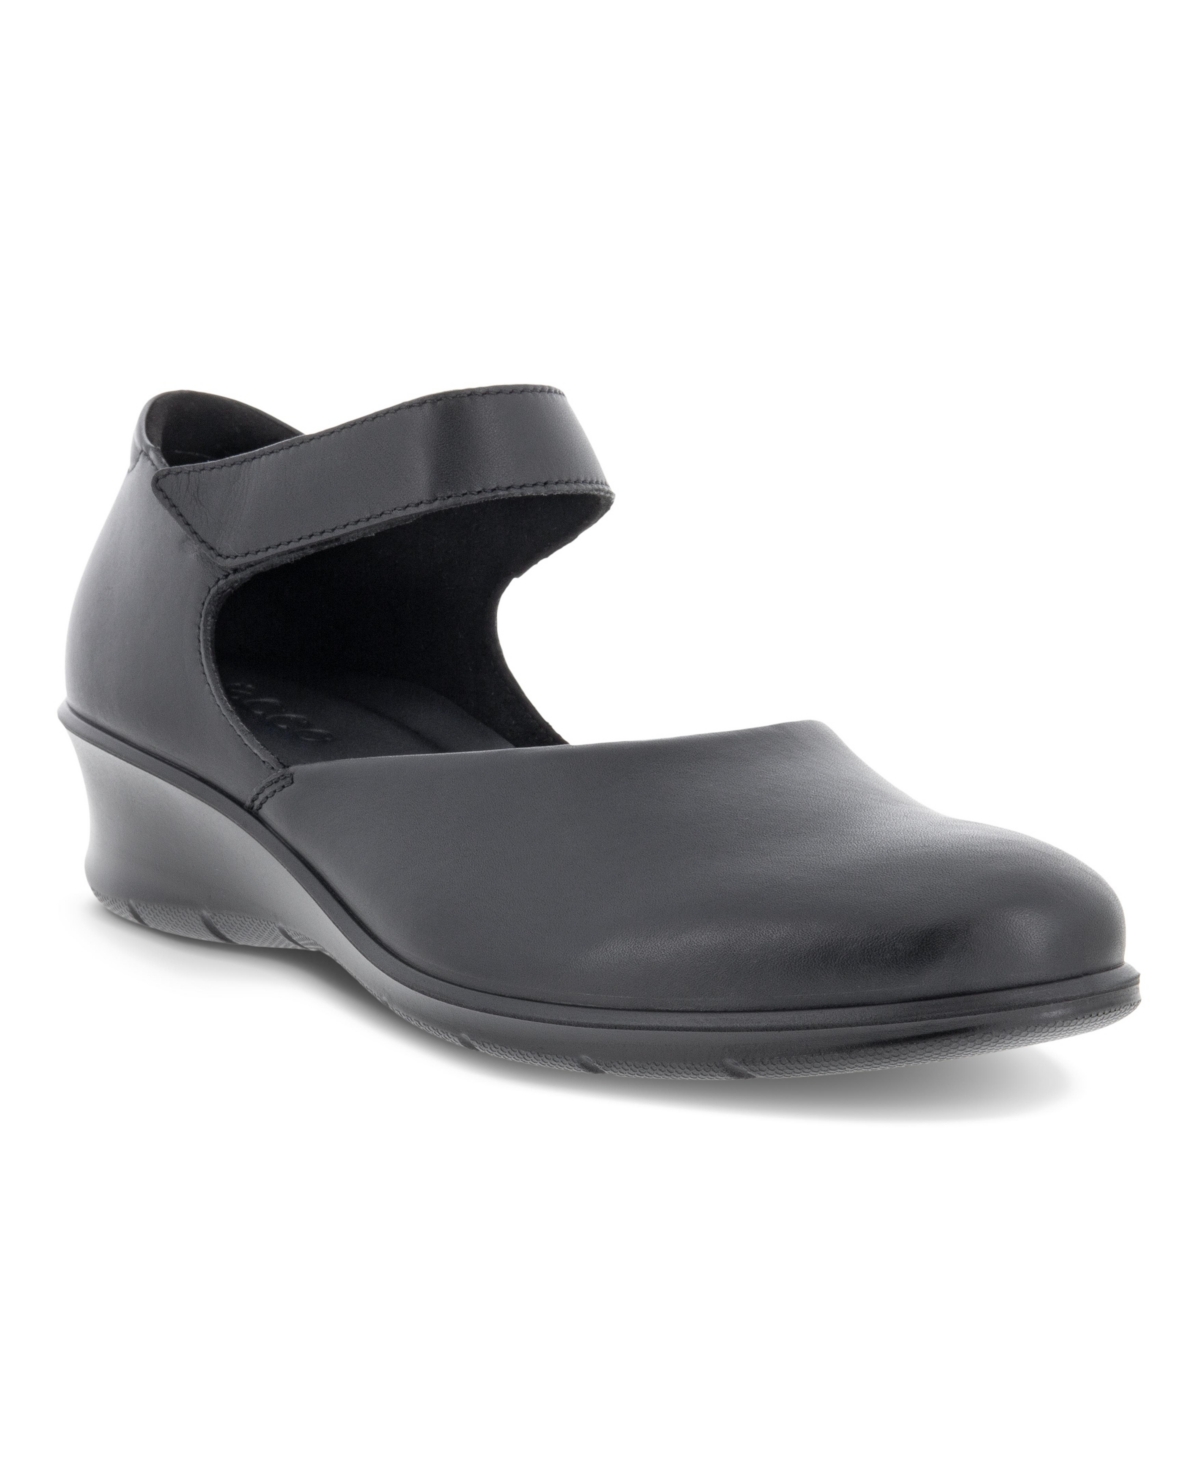 UPC 194891095679 product image for Ecco Women's Felicia Mary Jane Flats Women's Shoes | upcitemdb.com